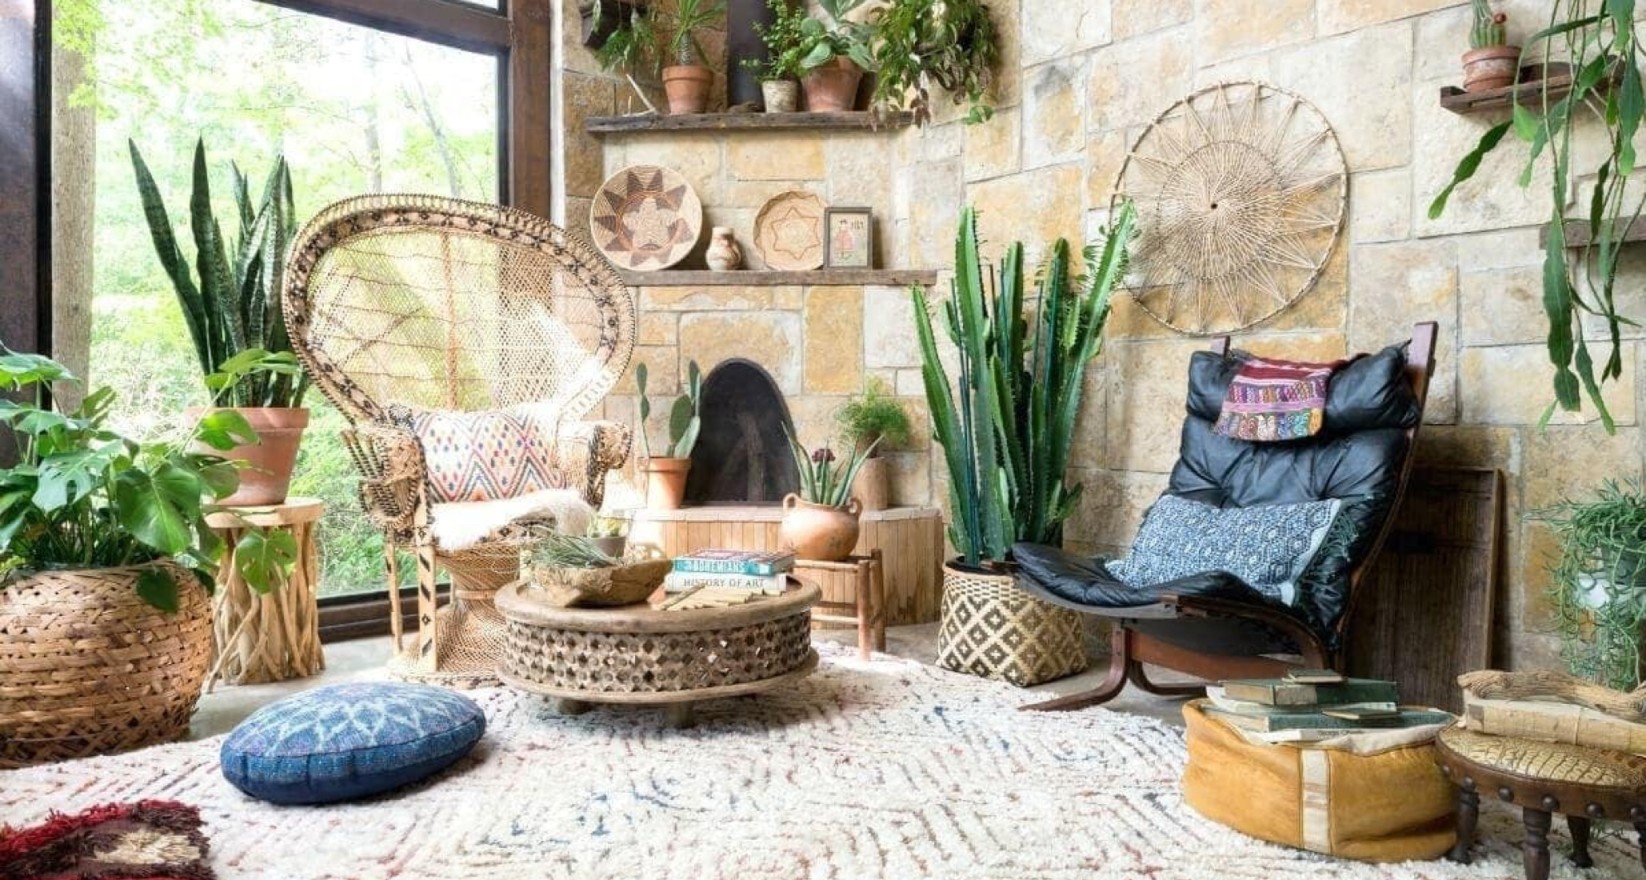 A rustic, jungle-themed living space is framed by cactus plants and a cream throw rug.